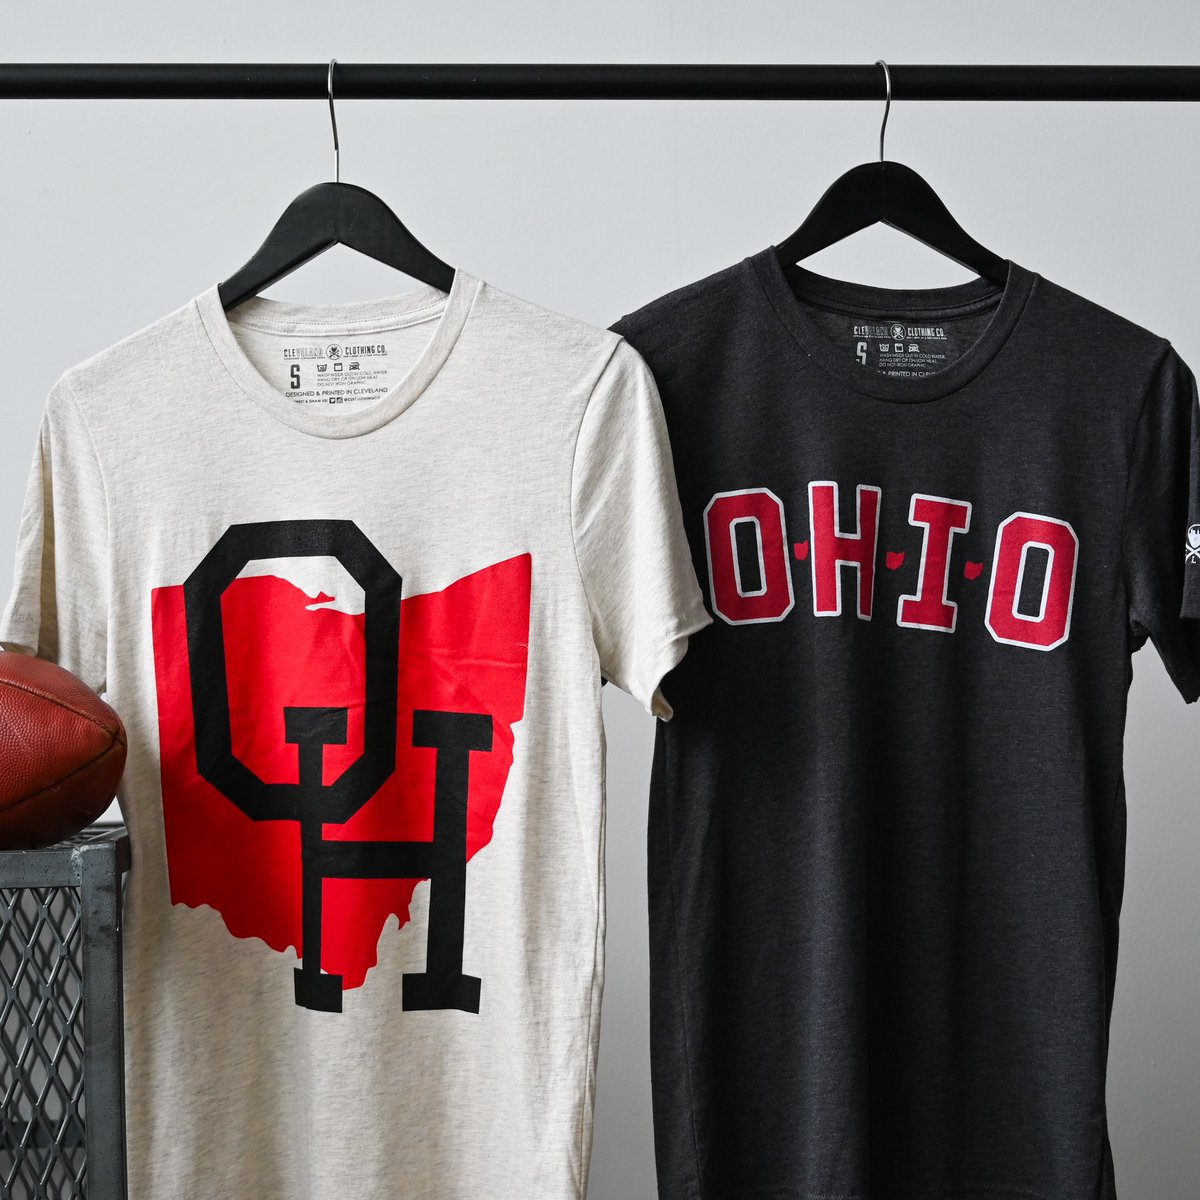 It’s GAME DAY in O-H-I-O!!! Gear up with our @ohiolove collection. Available in stores and online - tinyurl.com/y9ff7scj